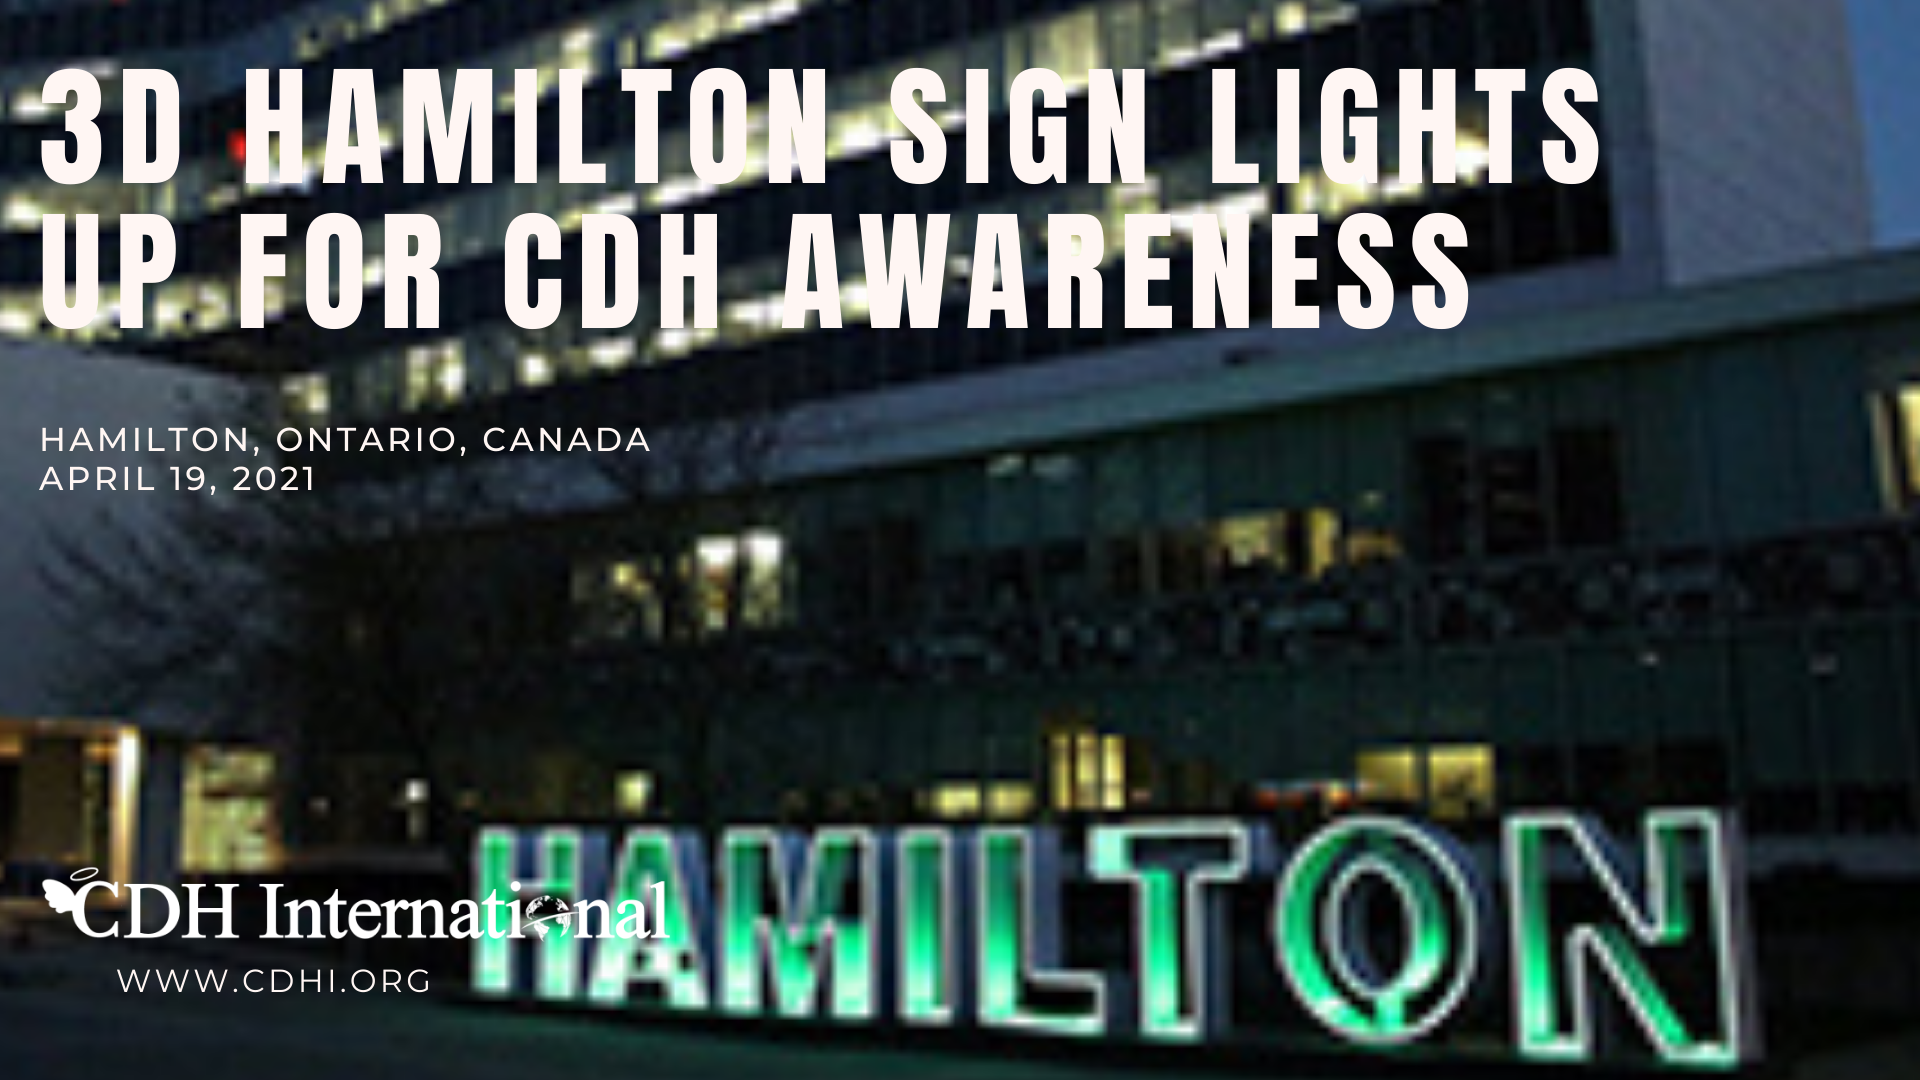 The Brant Street Pier and Beacon Lights Up for CDH Awareness